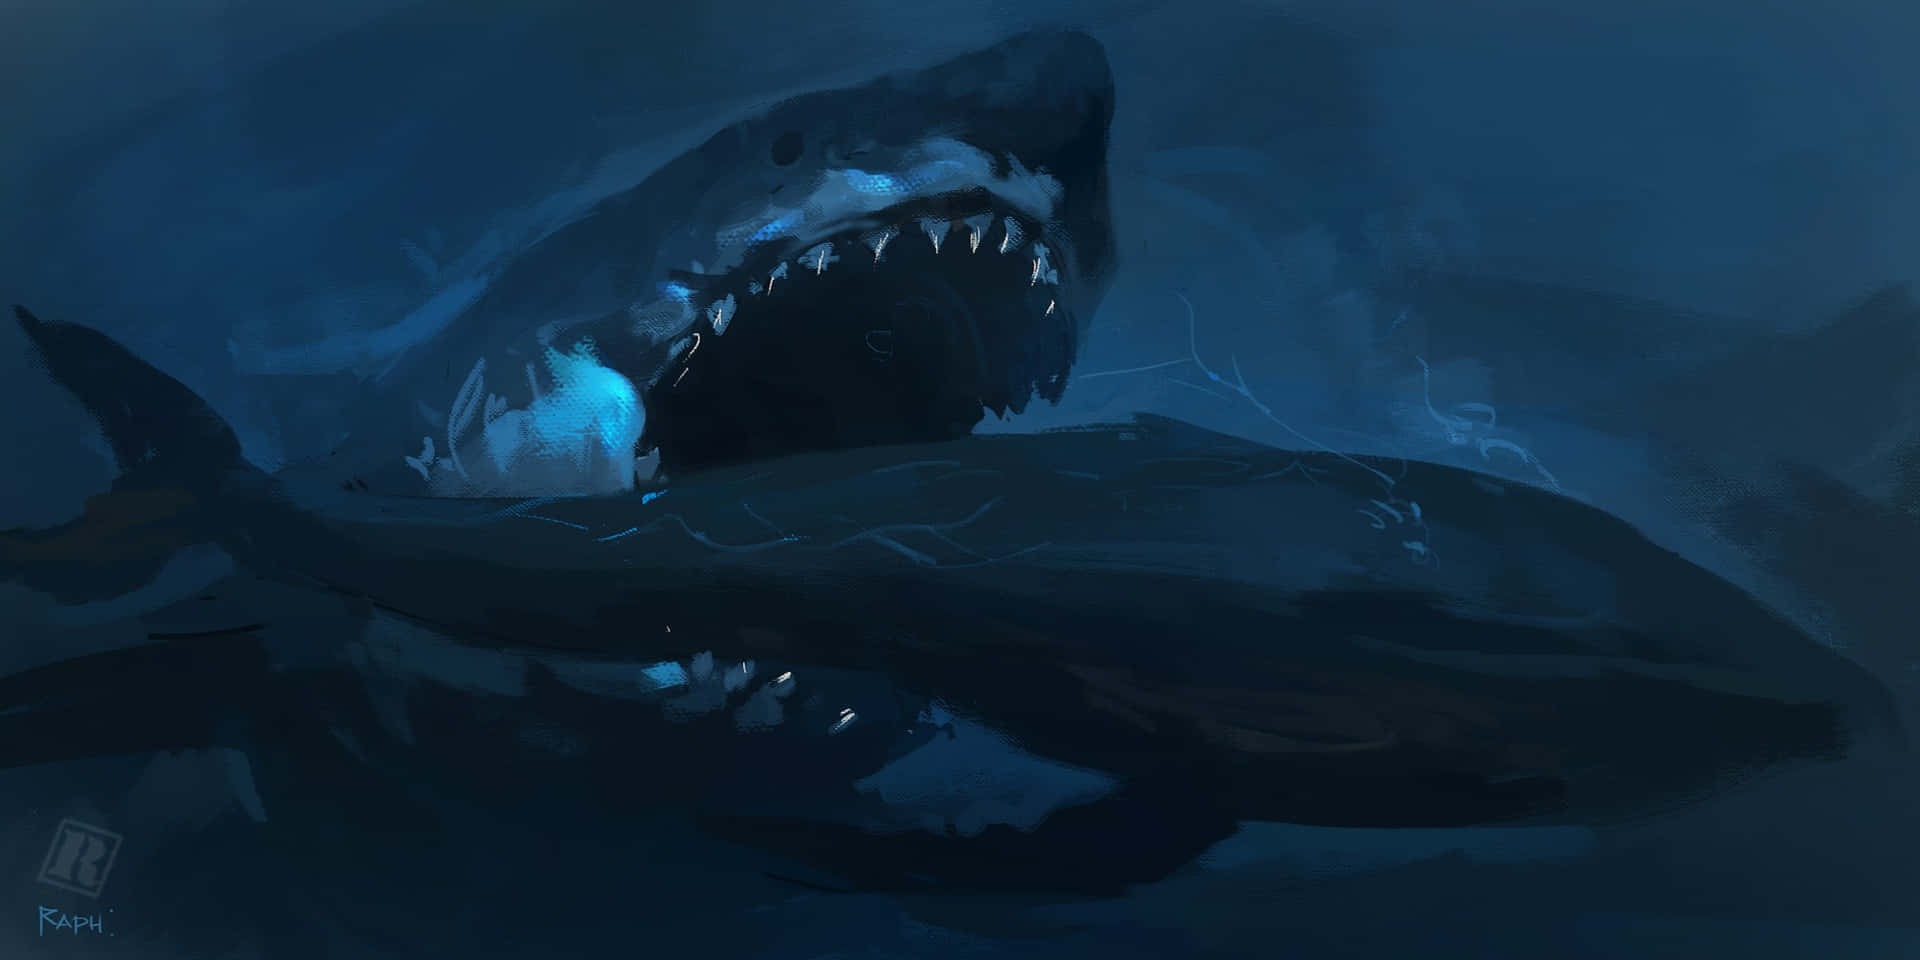 A Painting Of A Great White Shark With Its Mouth Open